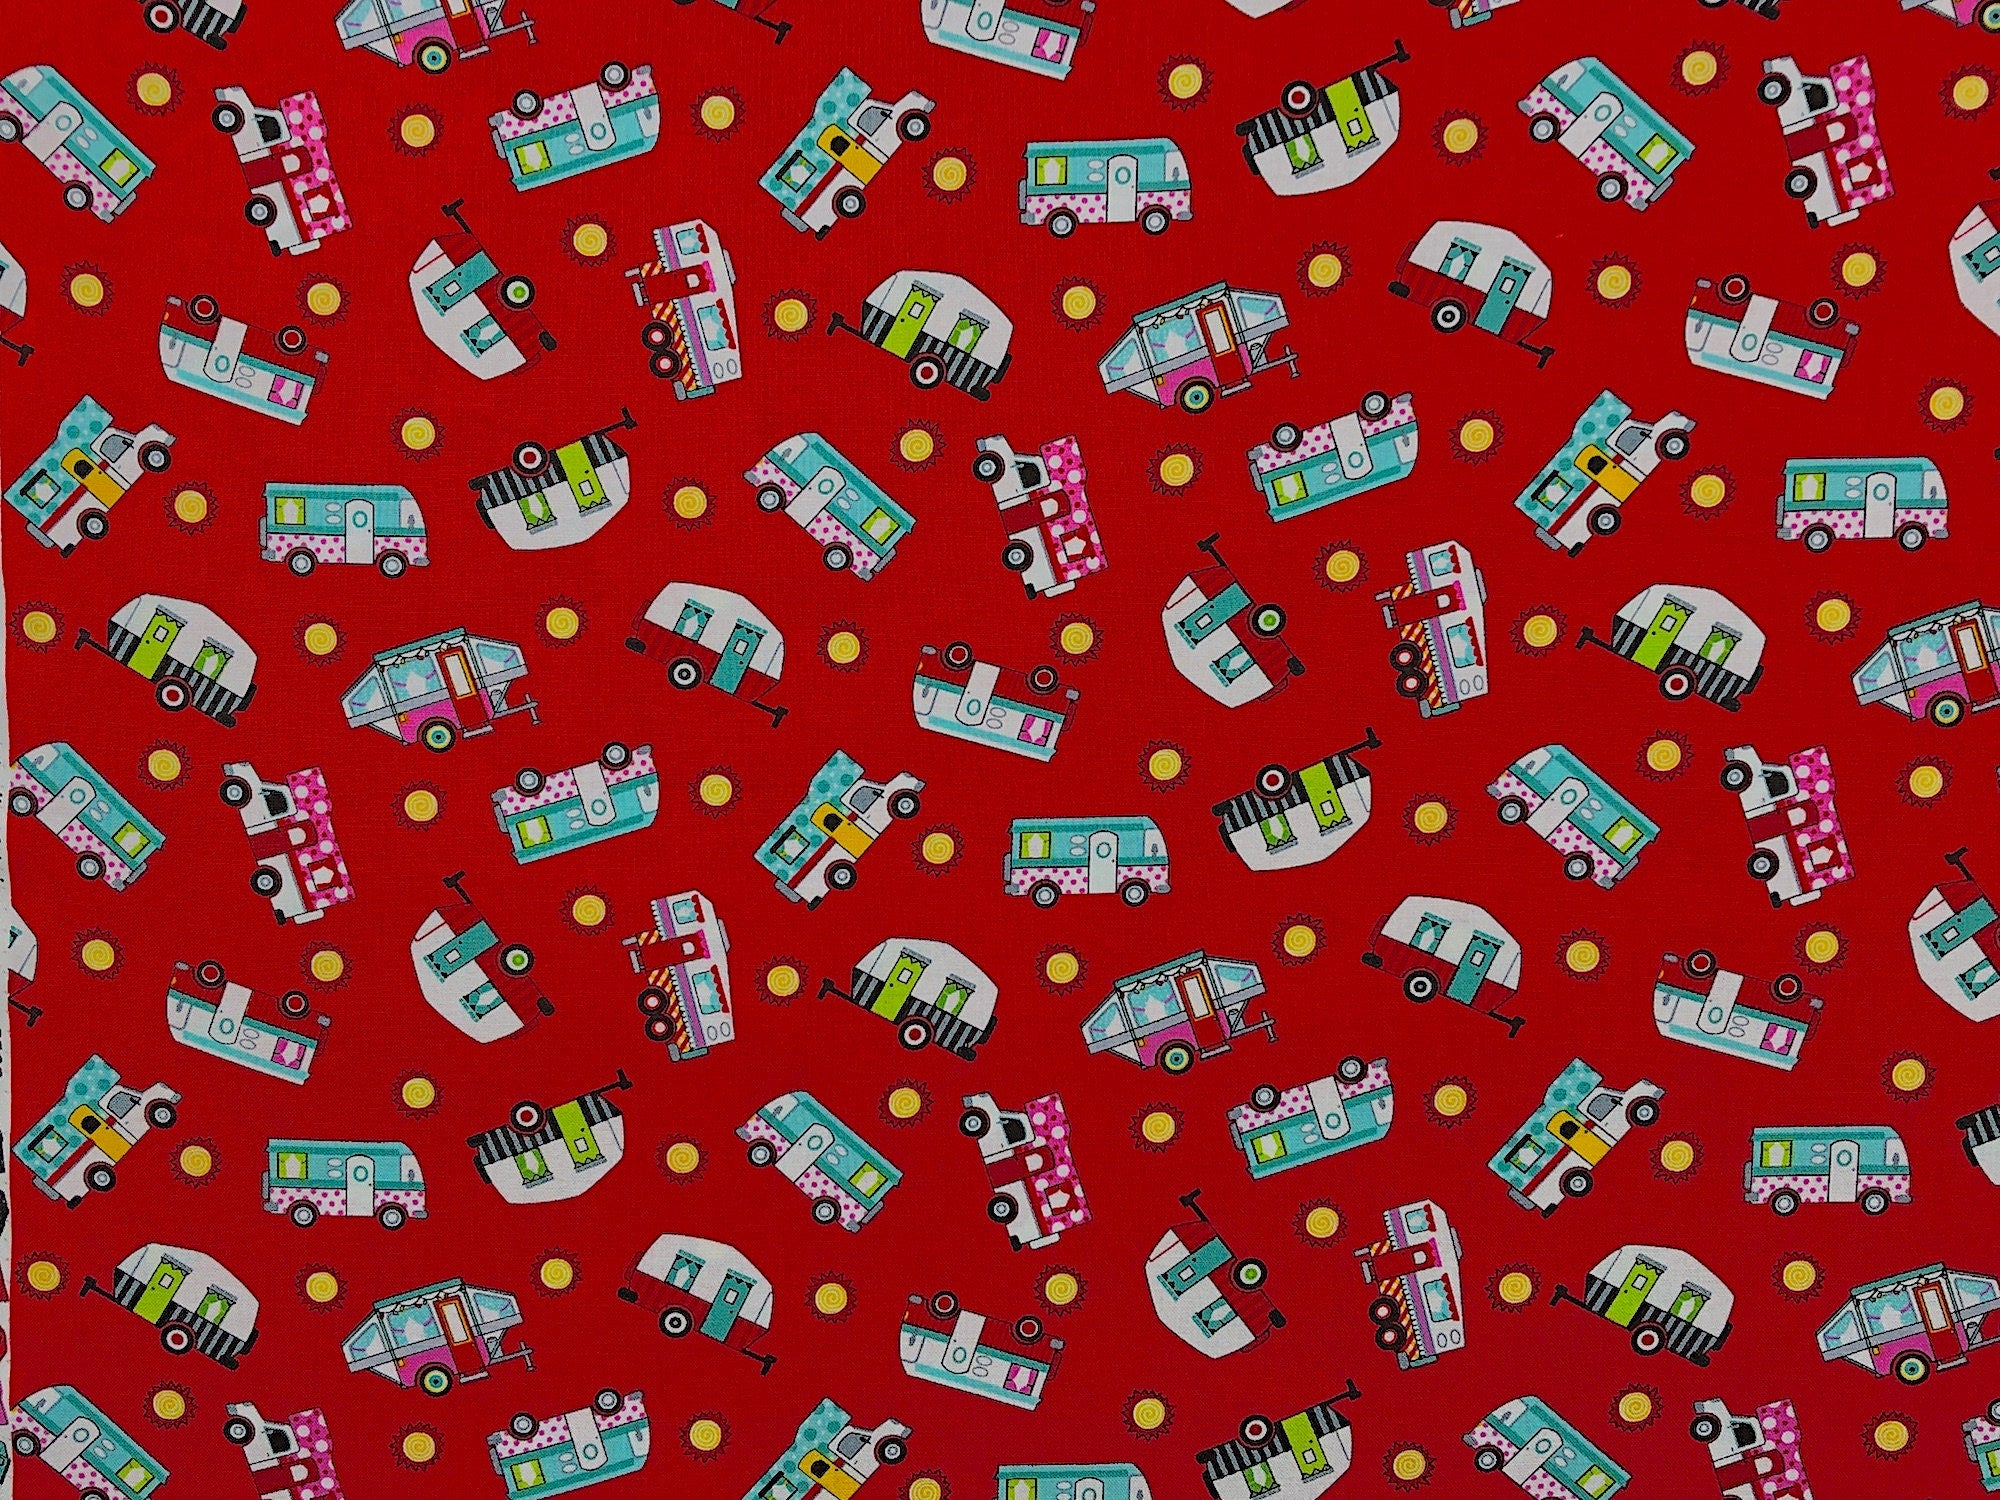 This fabric is called Tossed Campers Red and is covered with travel trailers, campers on trucks, 5th wheels and the sun